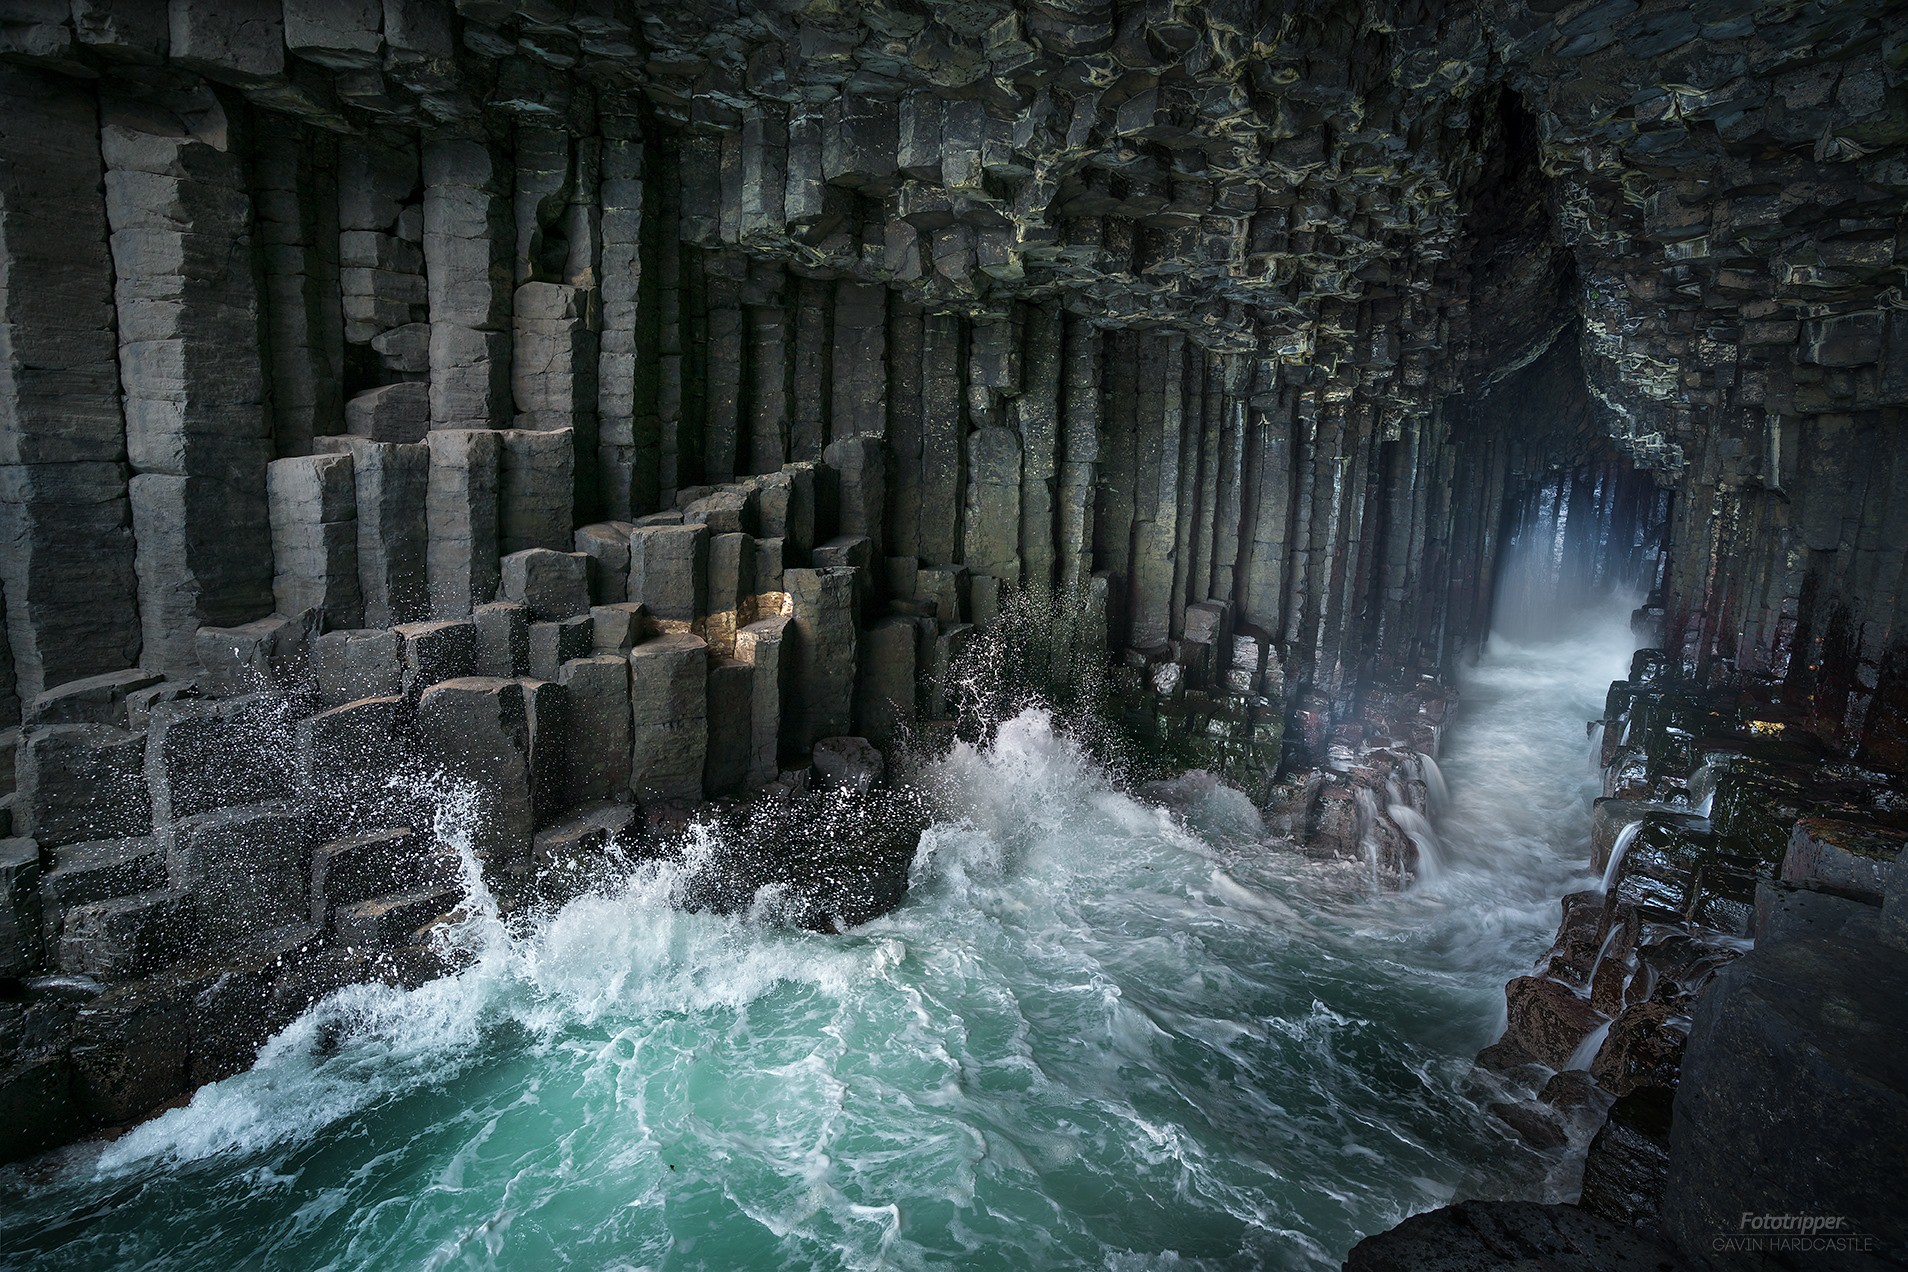 Fingals Cave on the Isle of Staffa by Gavin Hardcastle